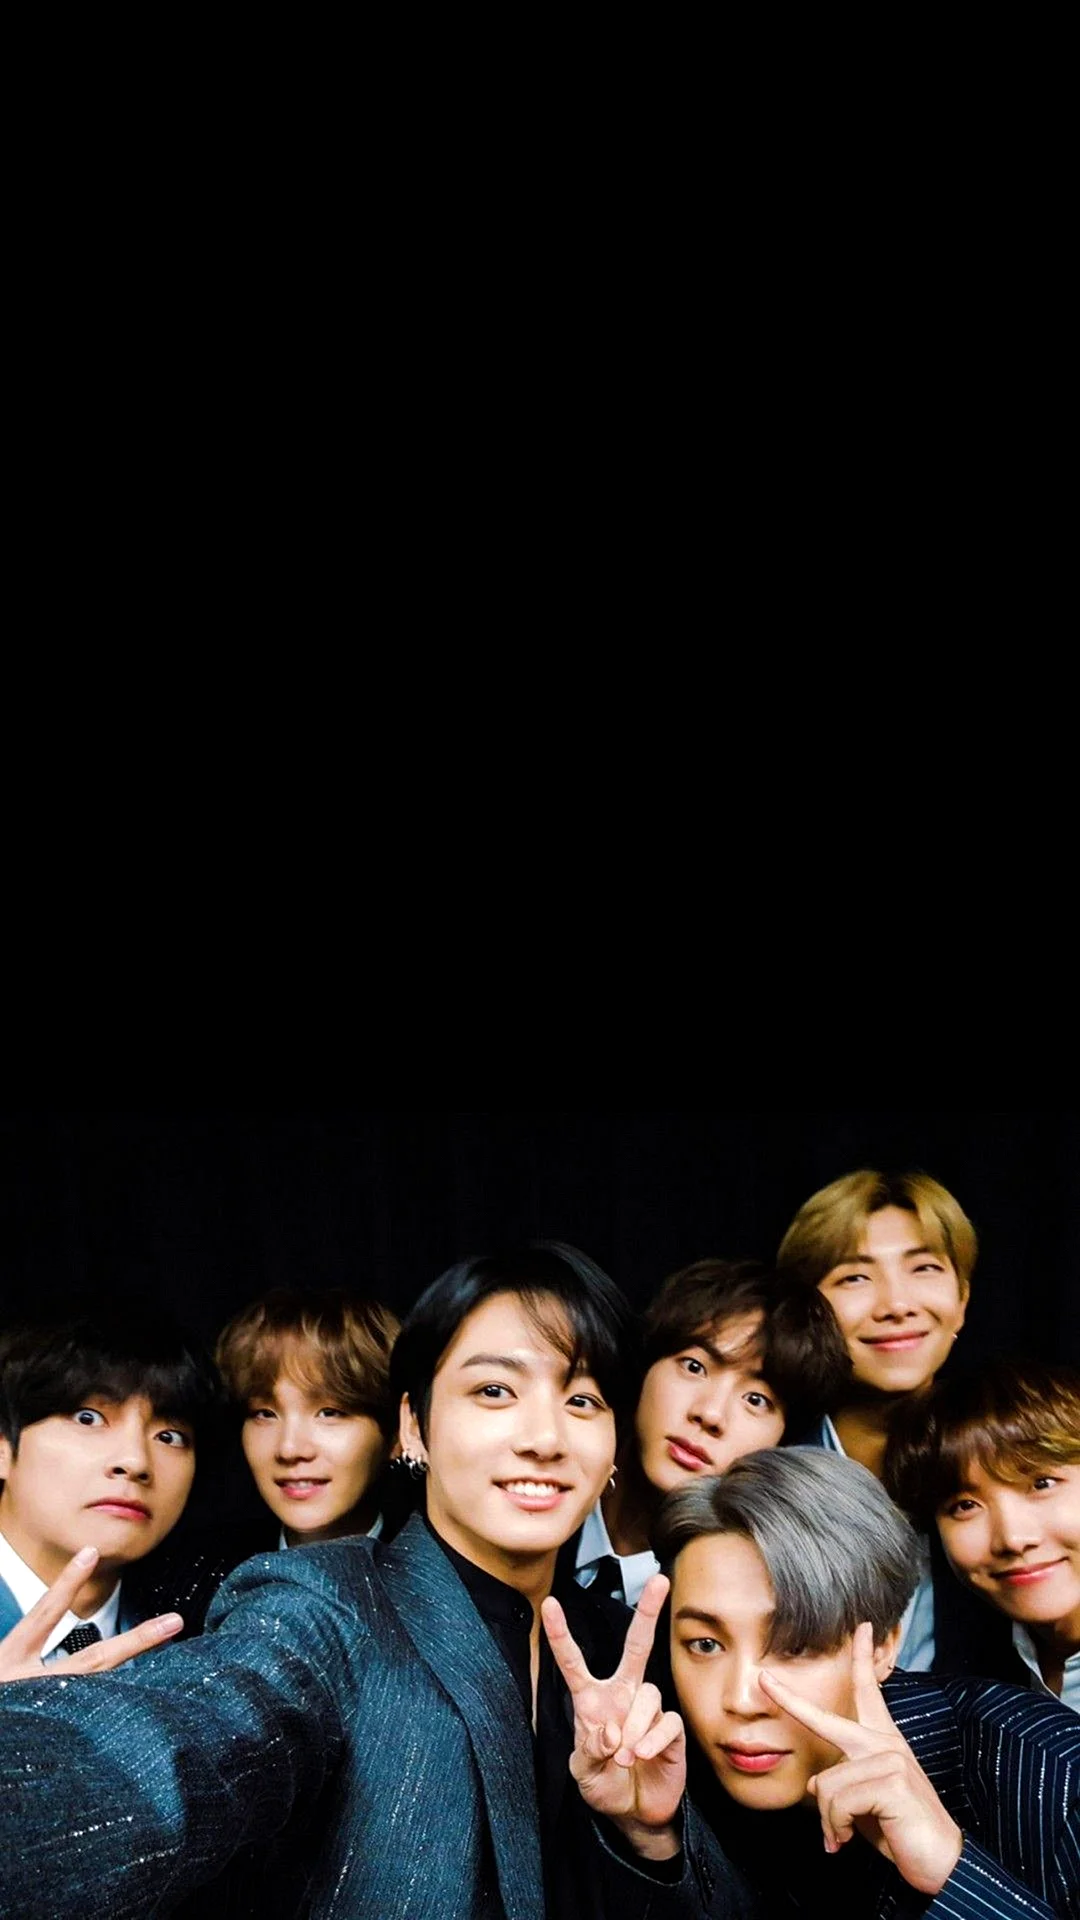 Bts Phone Wallpaper For iPhone